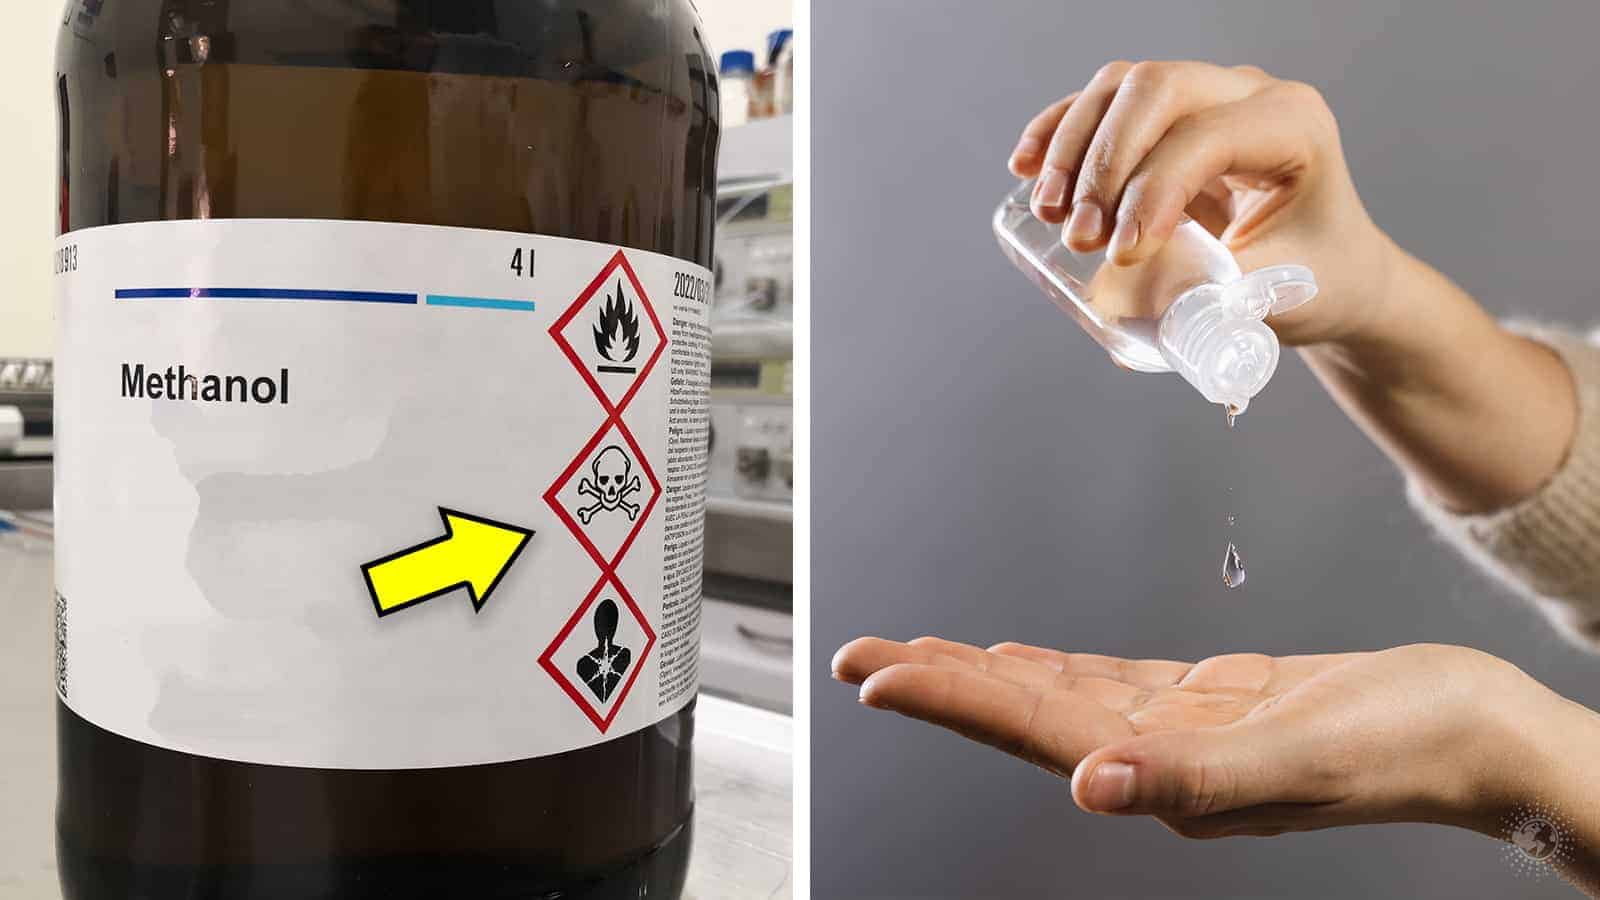 Public Health Officials Warn of Toxic Hand Sanitizer Ingredients